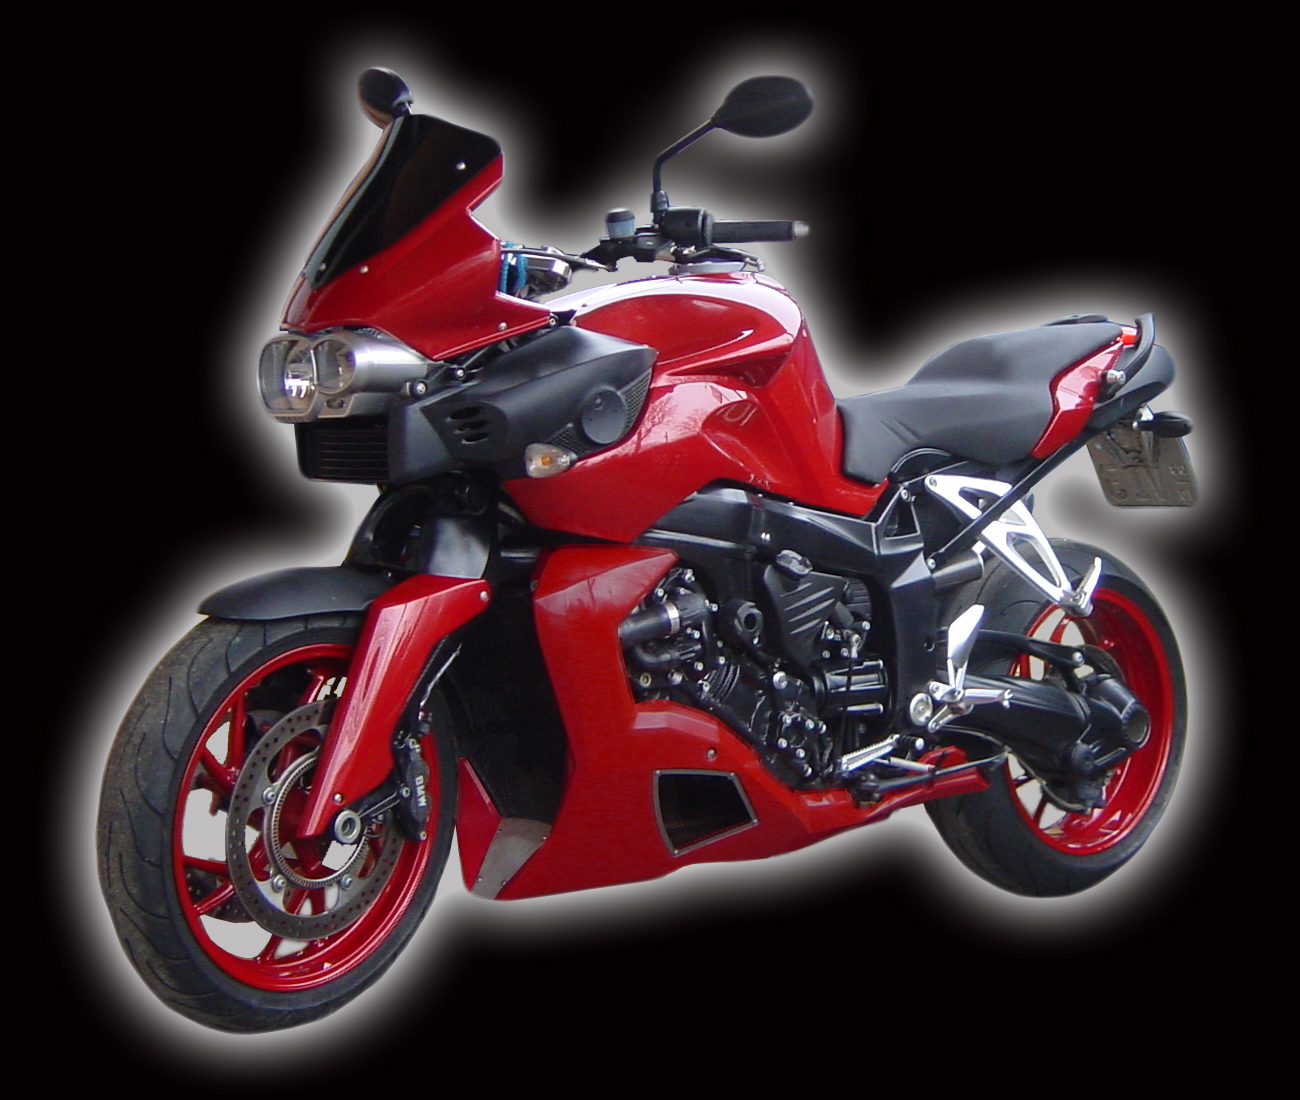 Schwabenmax Motorcycle Parts. Motorcycle accessories and motorcycle tuning  in premium quality. Specializing in motorcycle tuning and refinement for  Vmax, K1200R and K1300R as well as the GSX 1400.Specializes on gas path  shortening